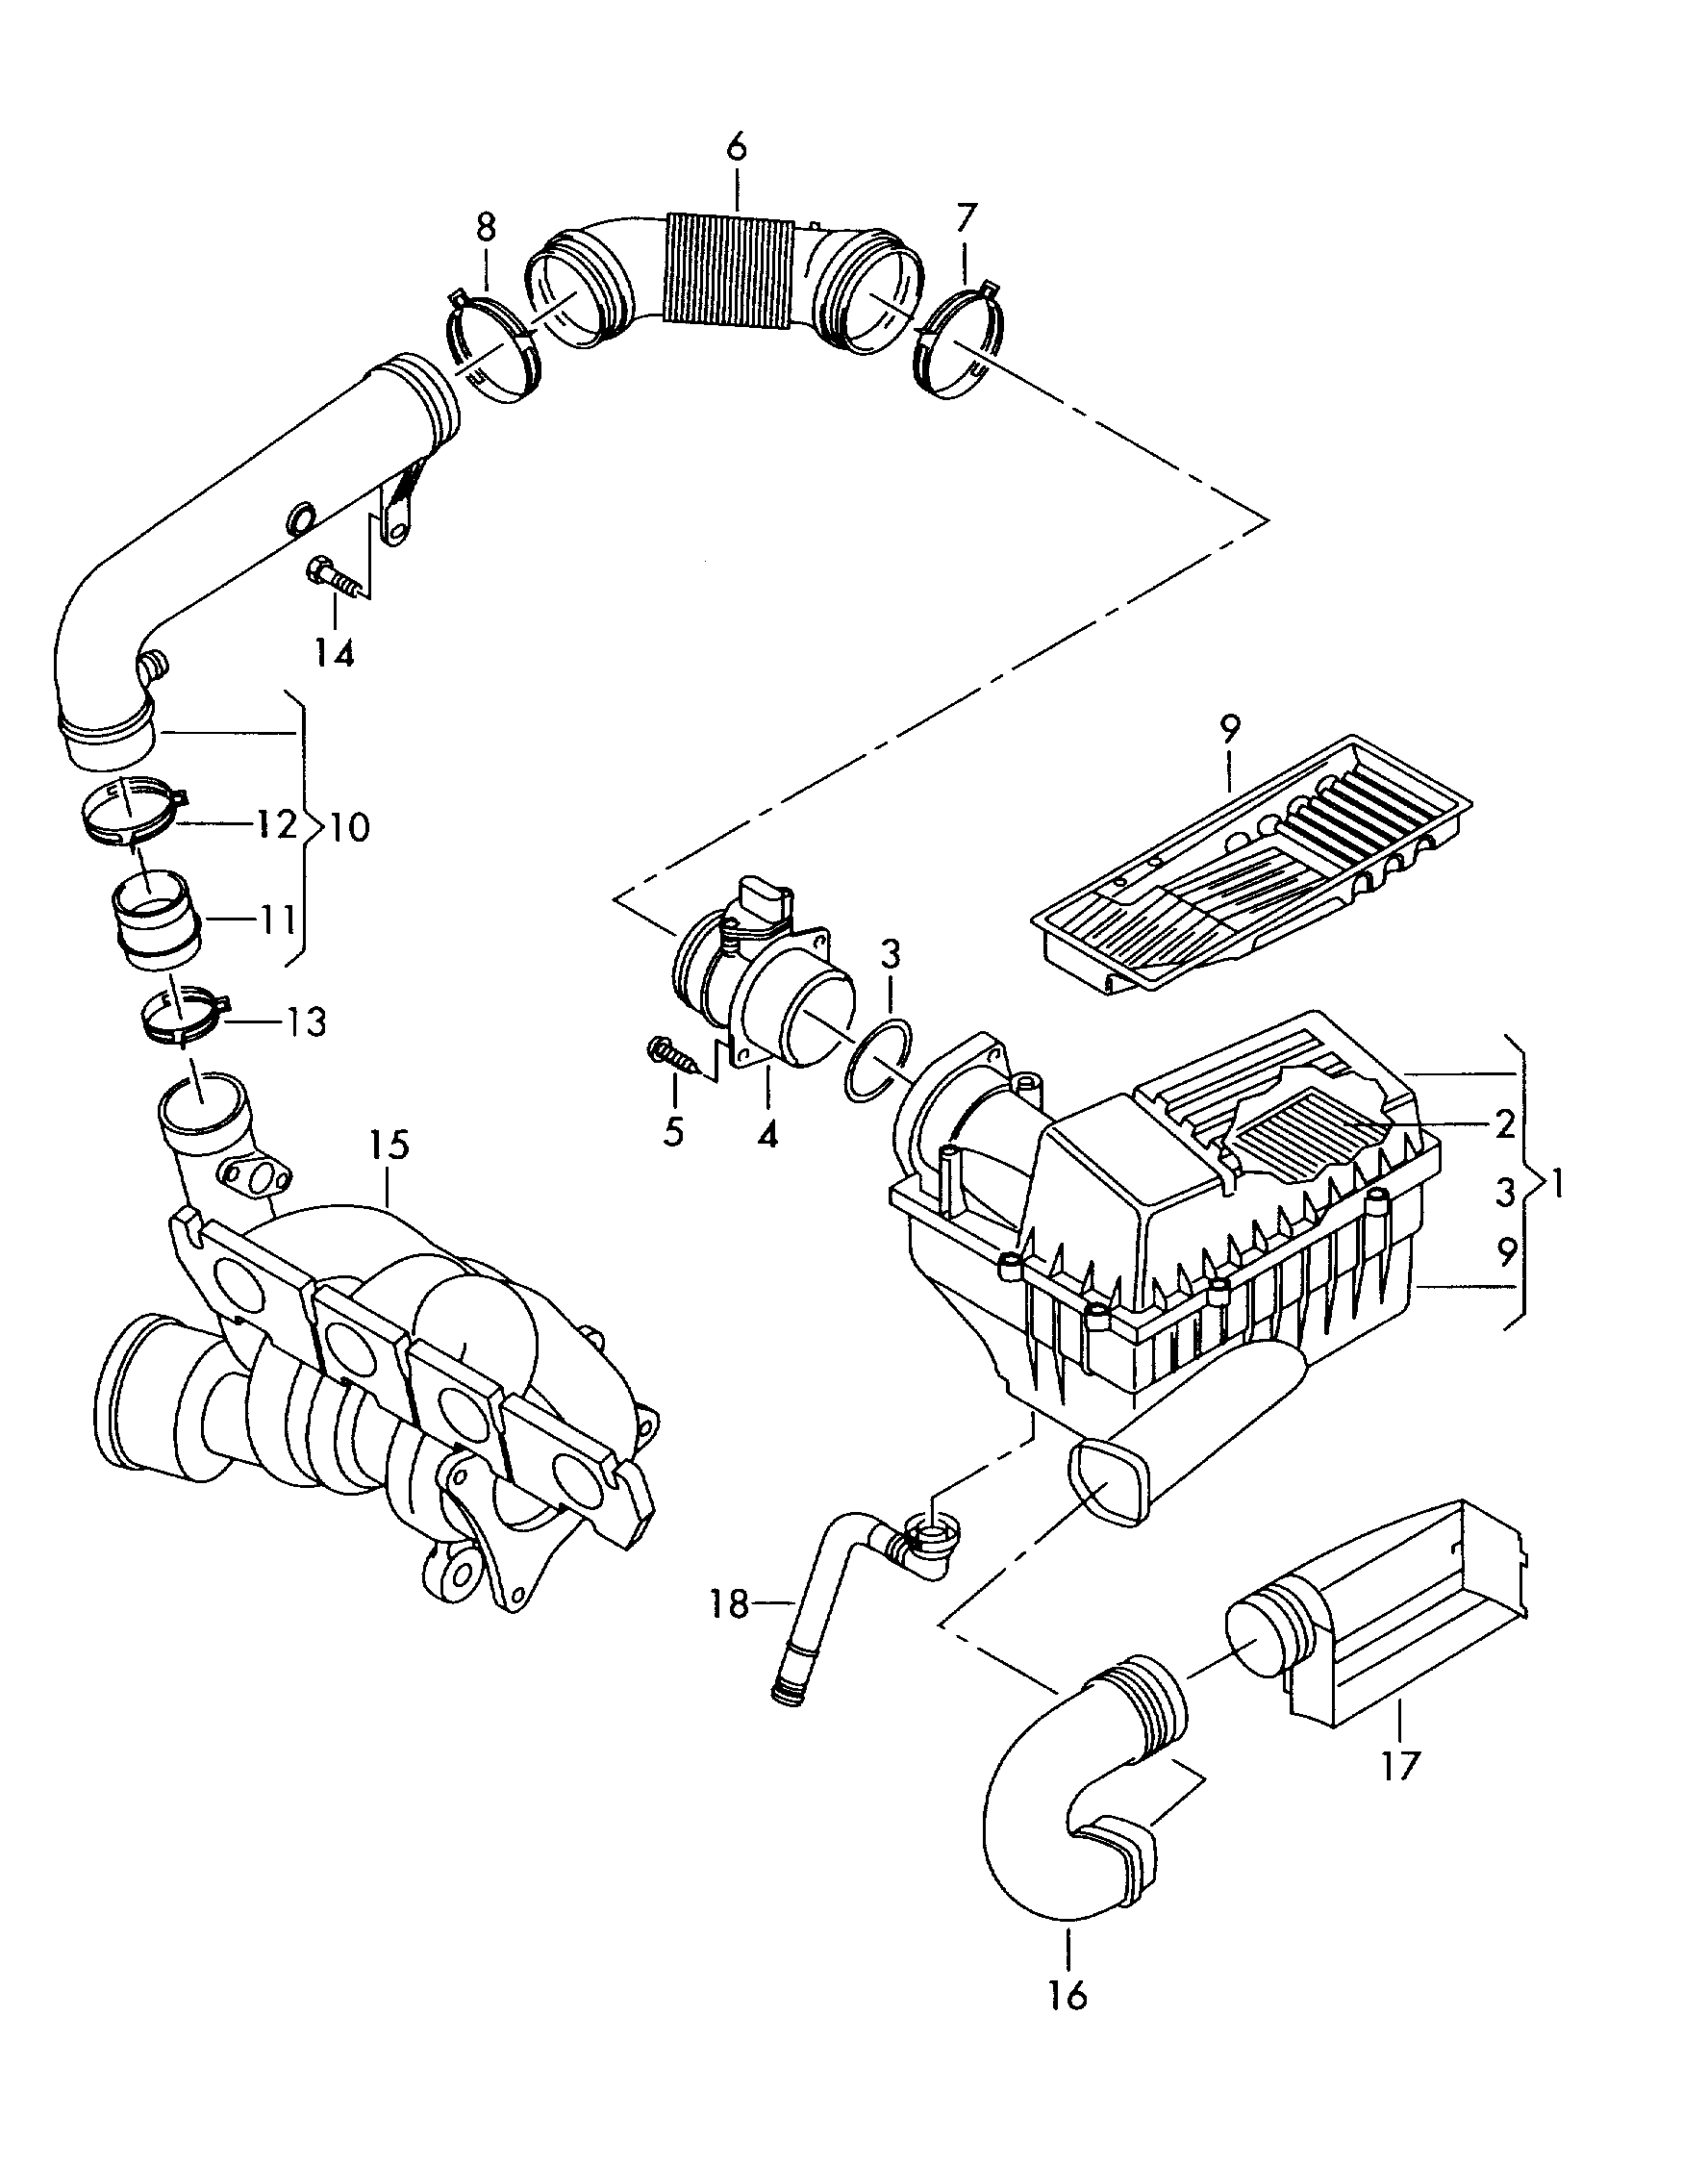 Air filter with connecting<br>parts 2.0 Ltr. - Tiguan - tig